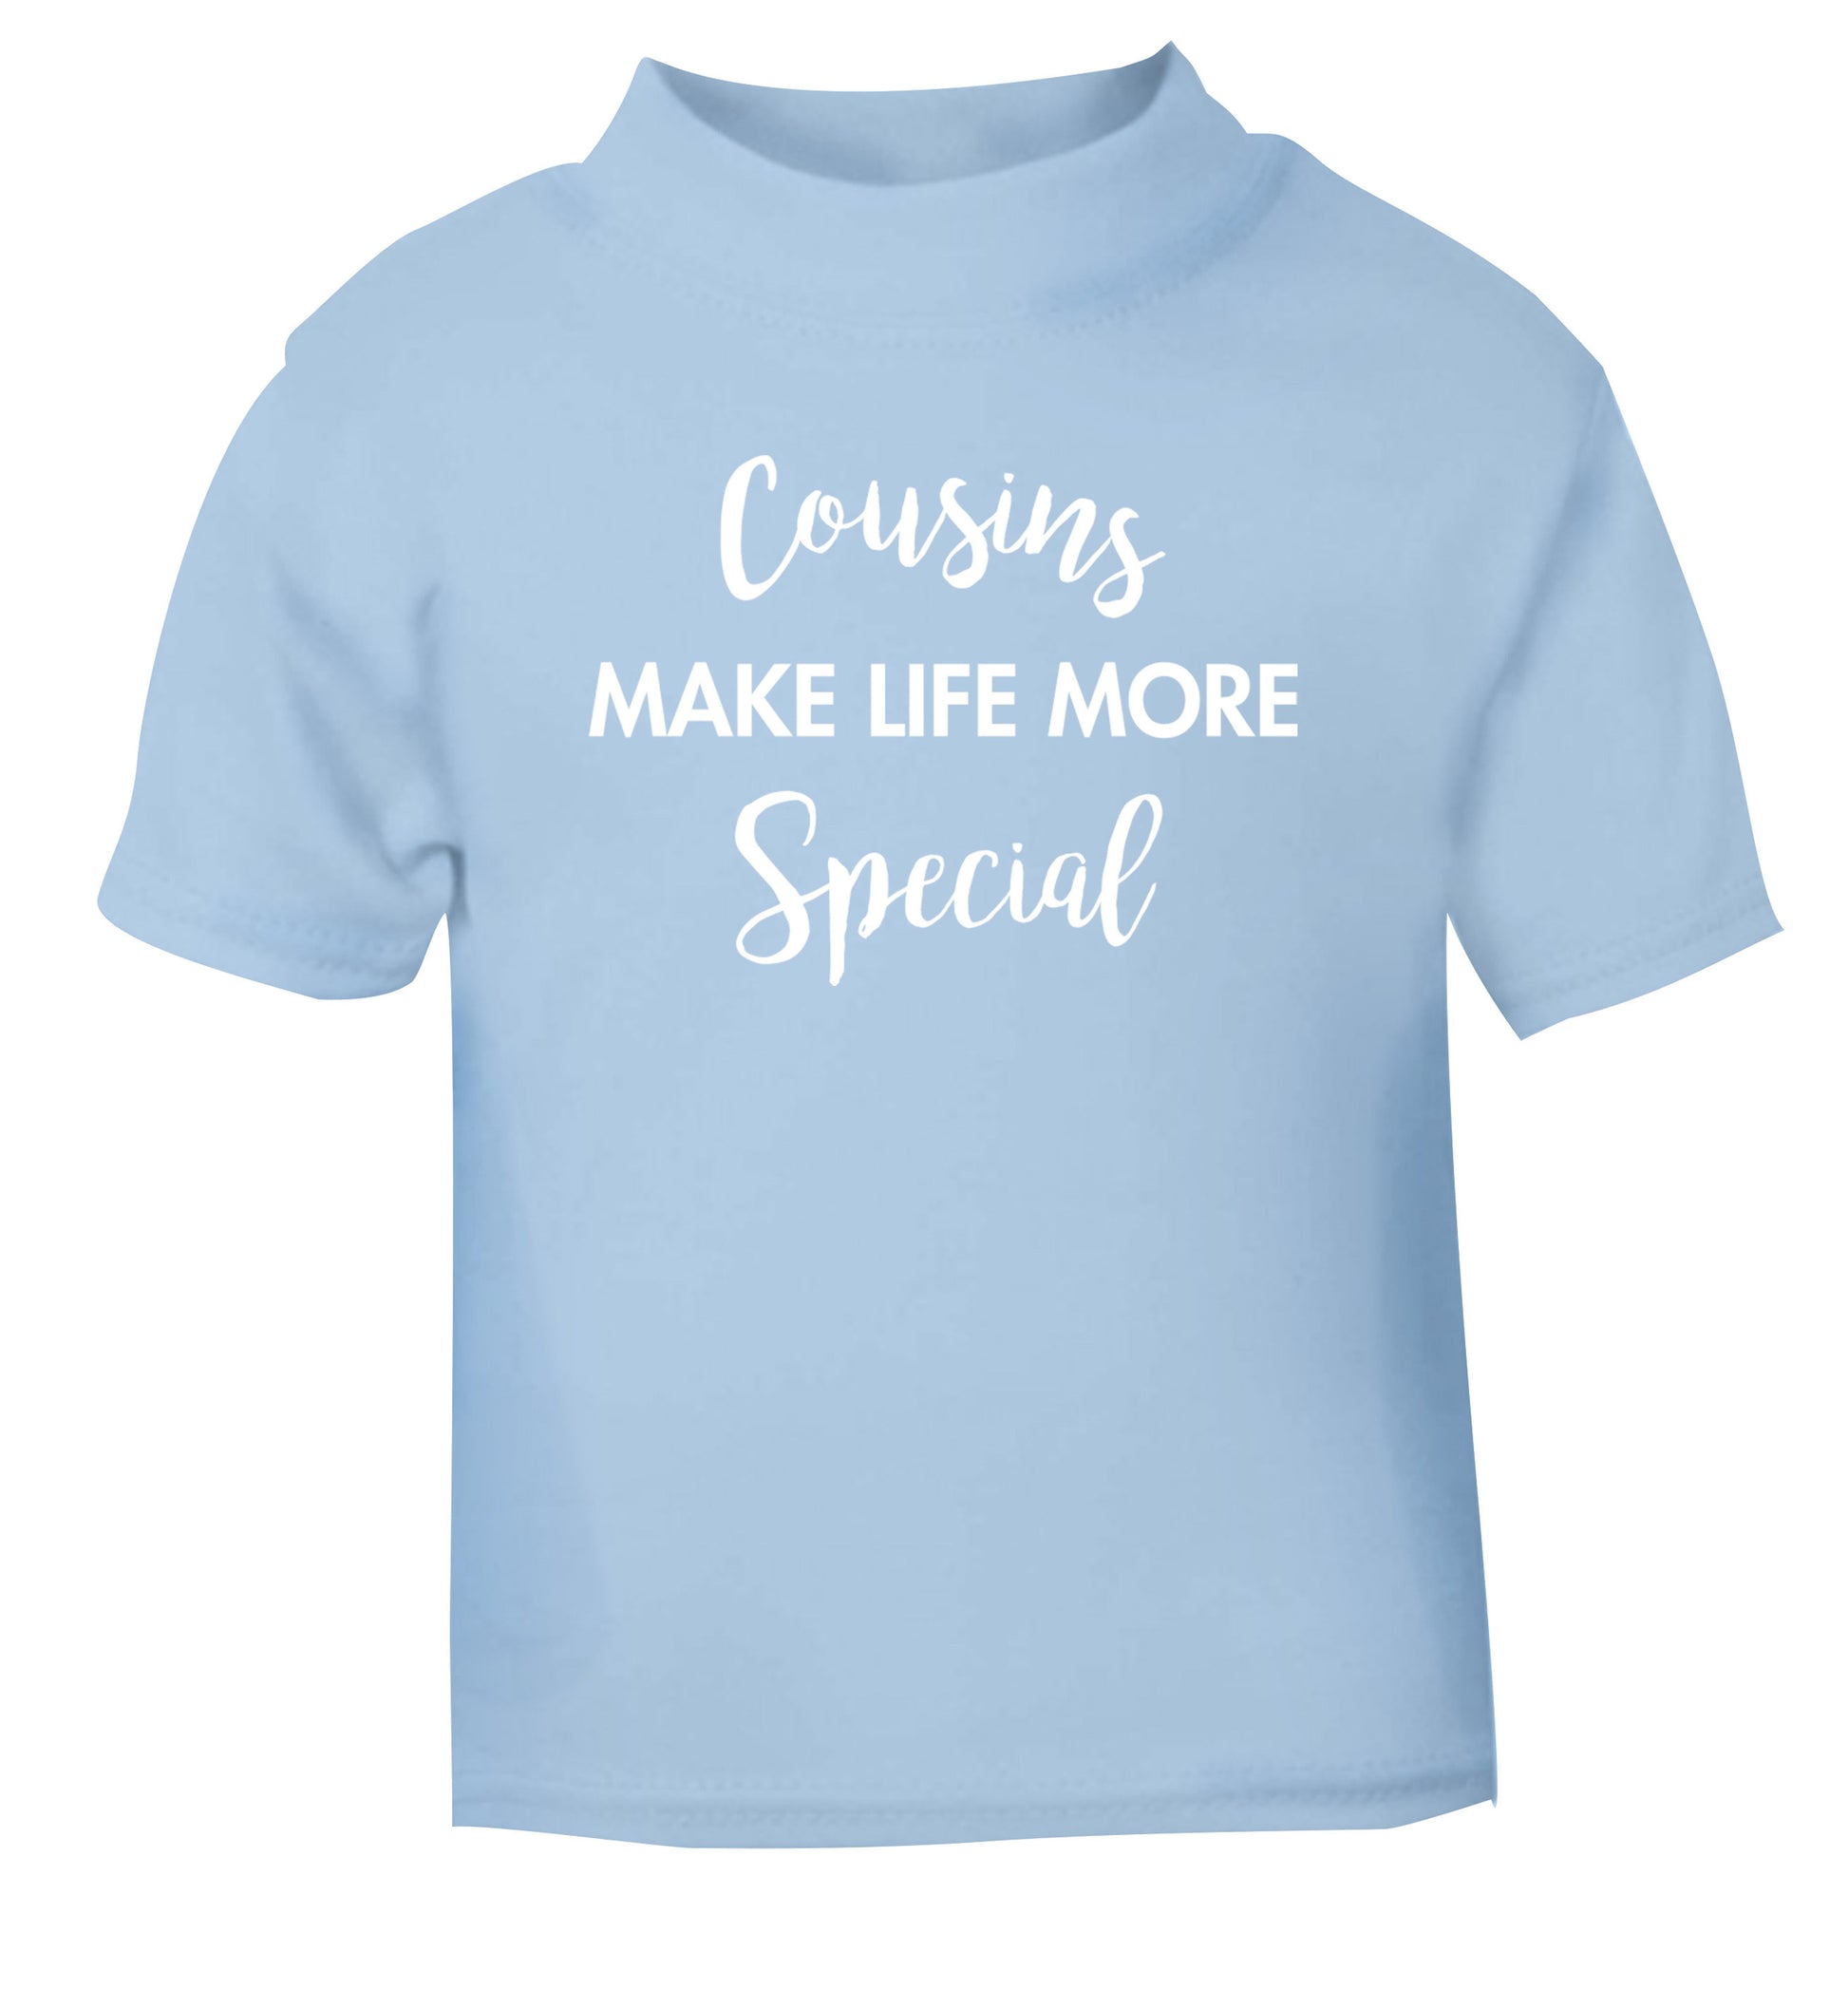 Cousins make life more special light blue Baby Toddler Tshirt 2 Years